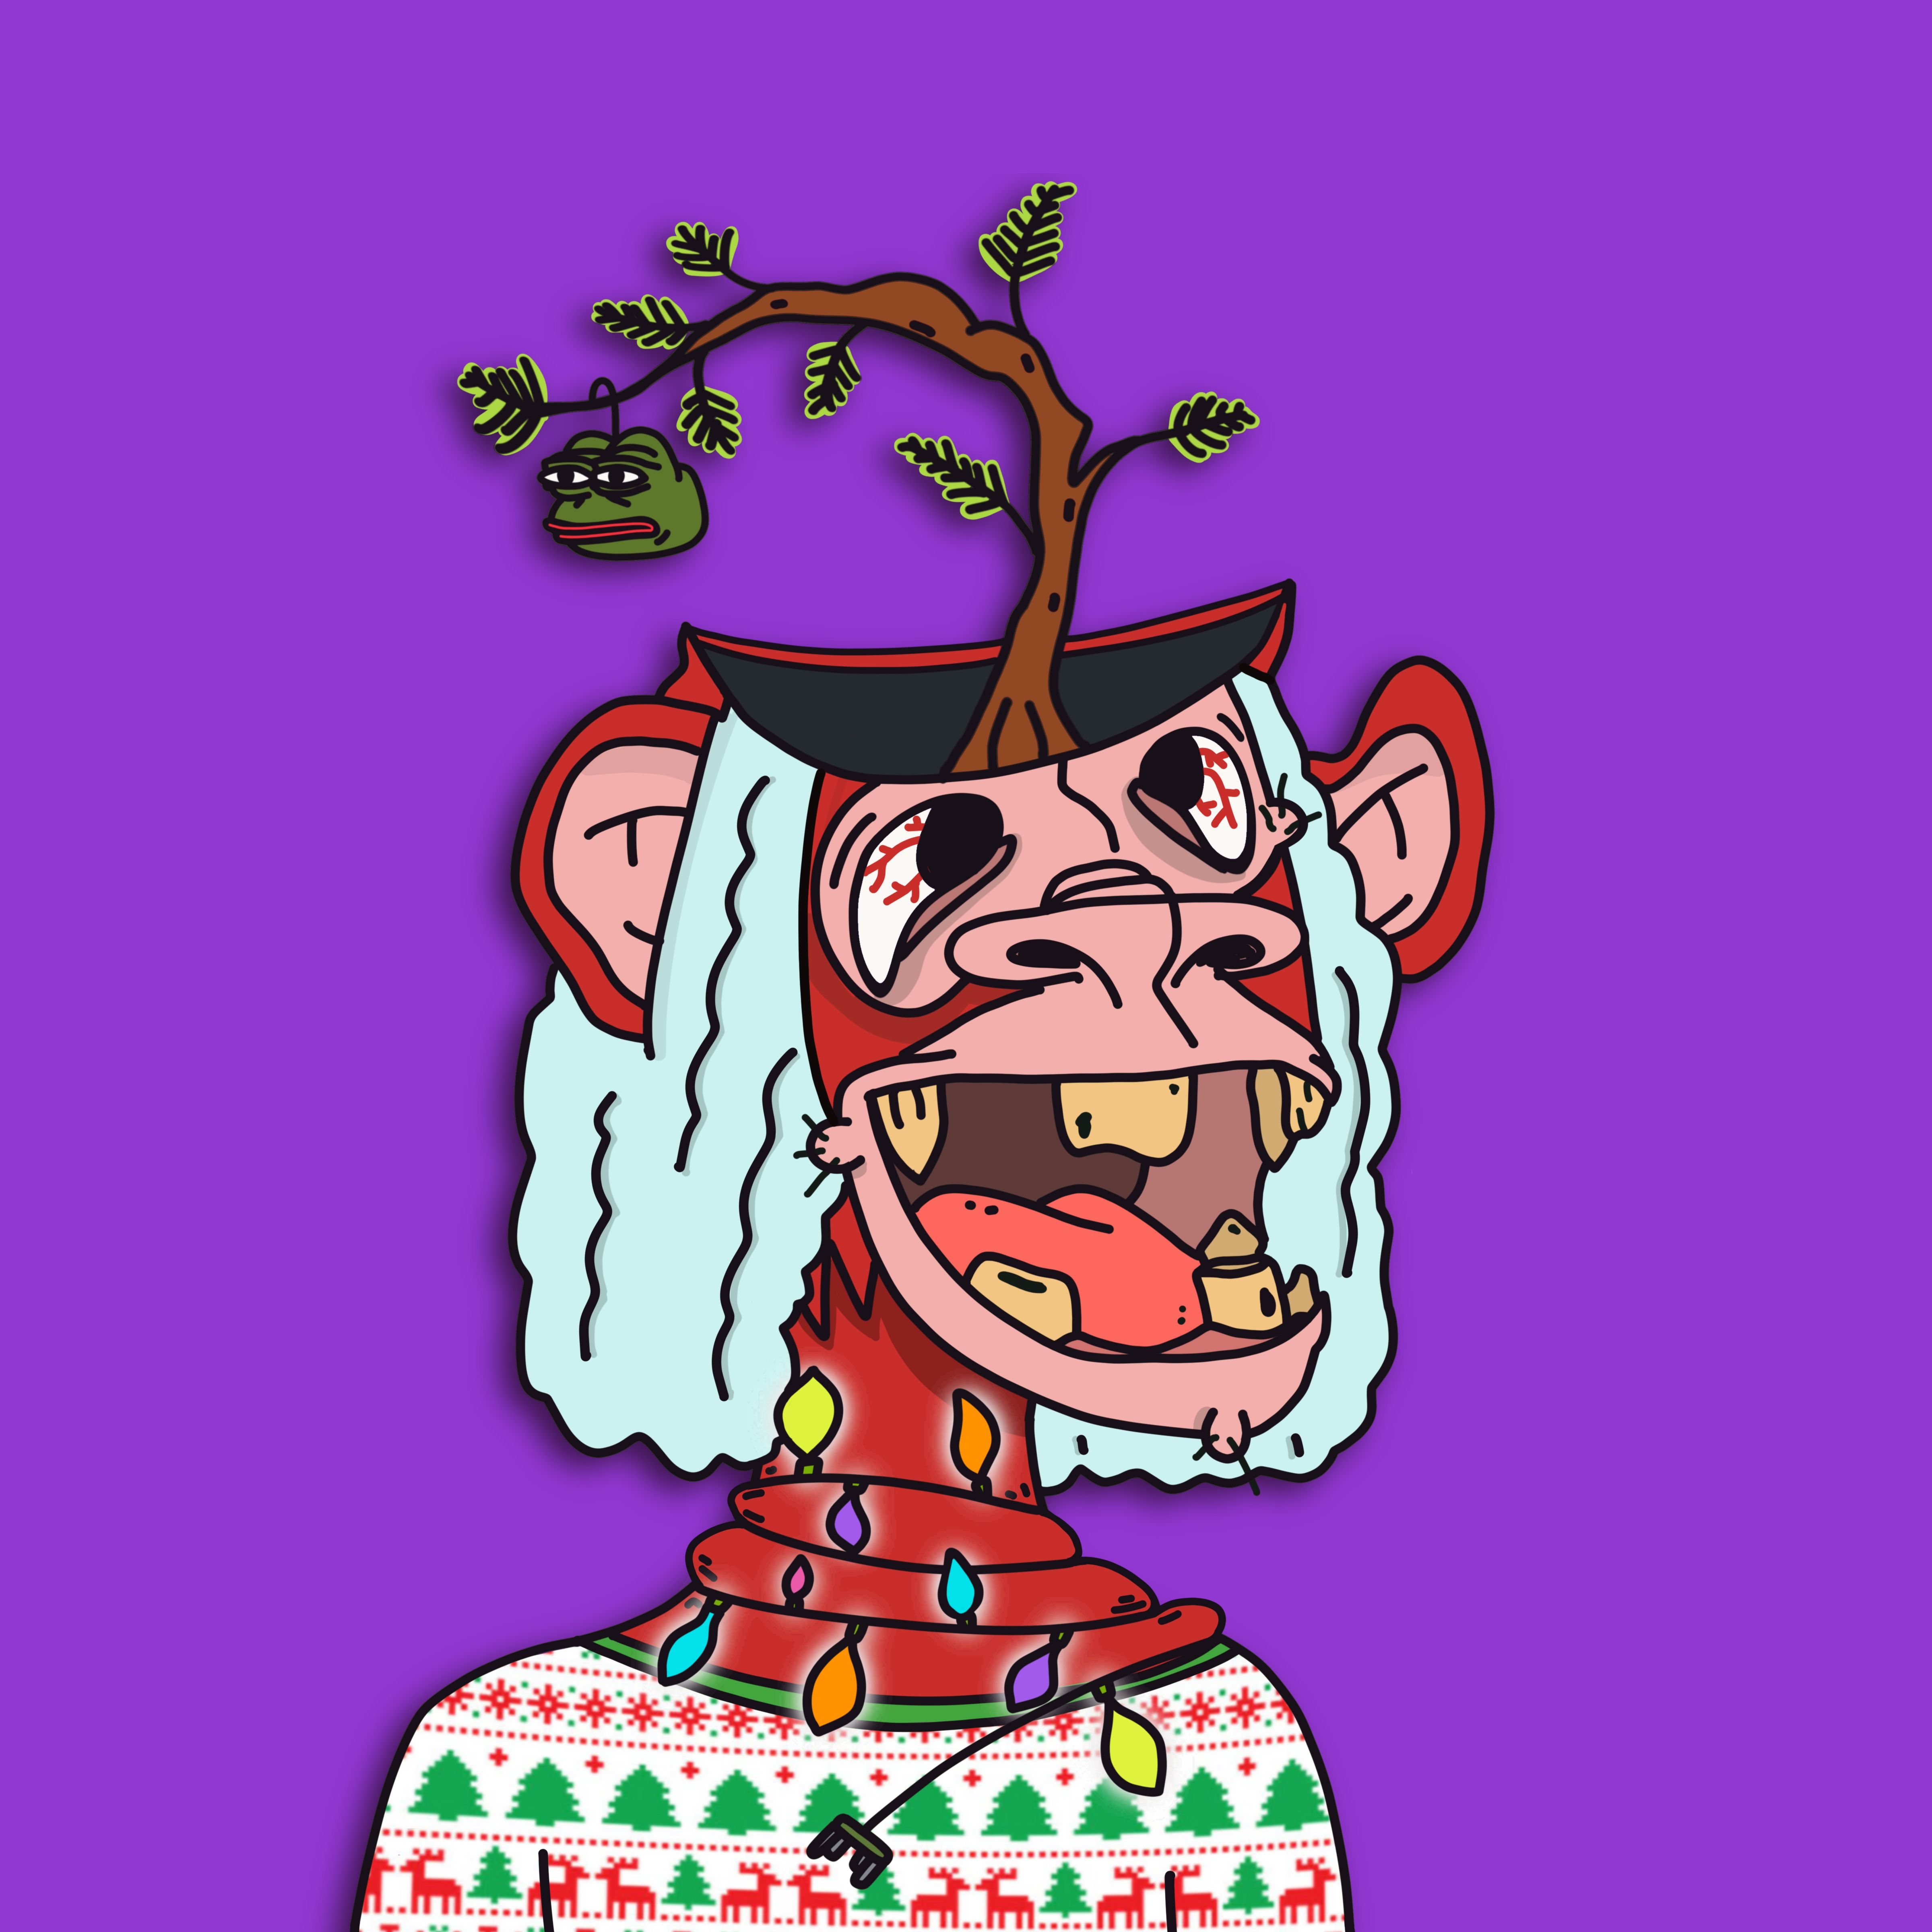 Drooling Apes - DERPYXMAS